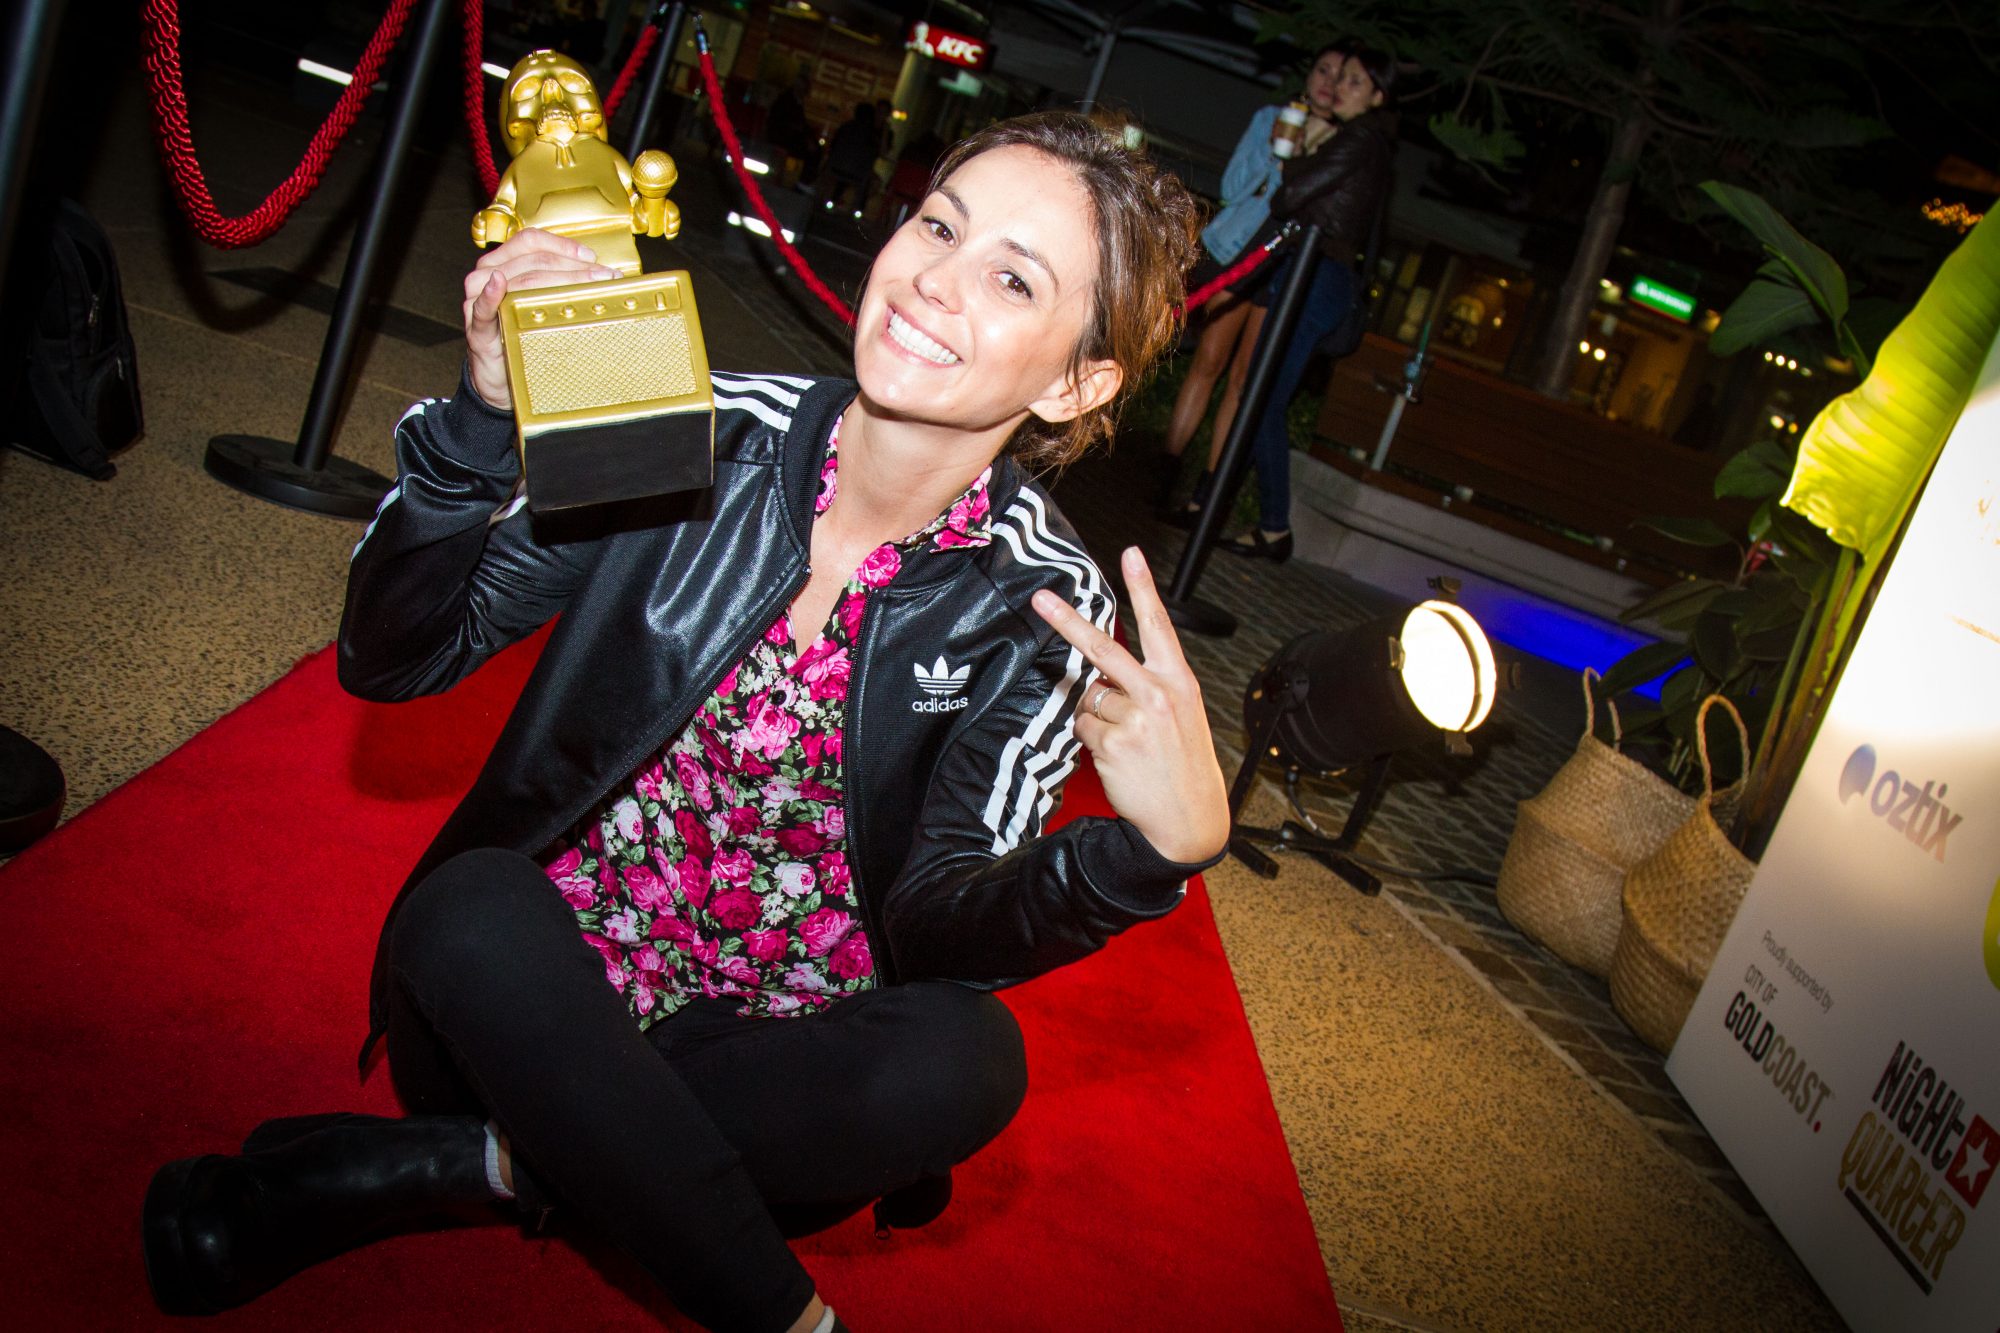 Nominations open for 2019 Gold Coast Music Awards